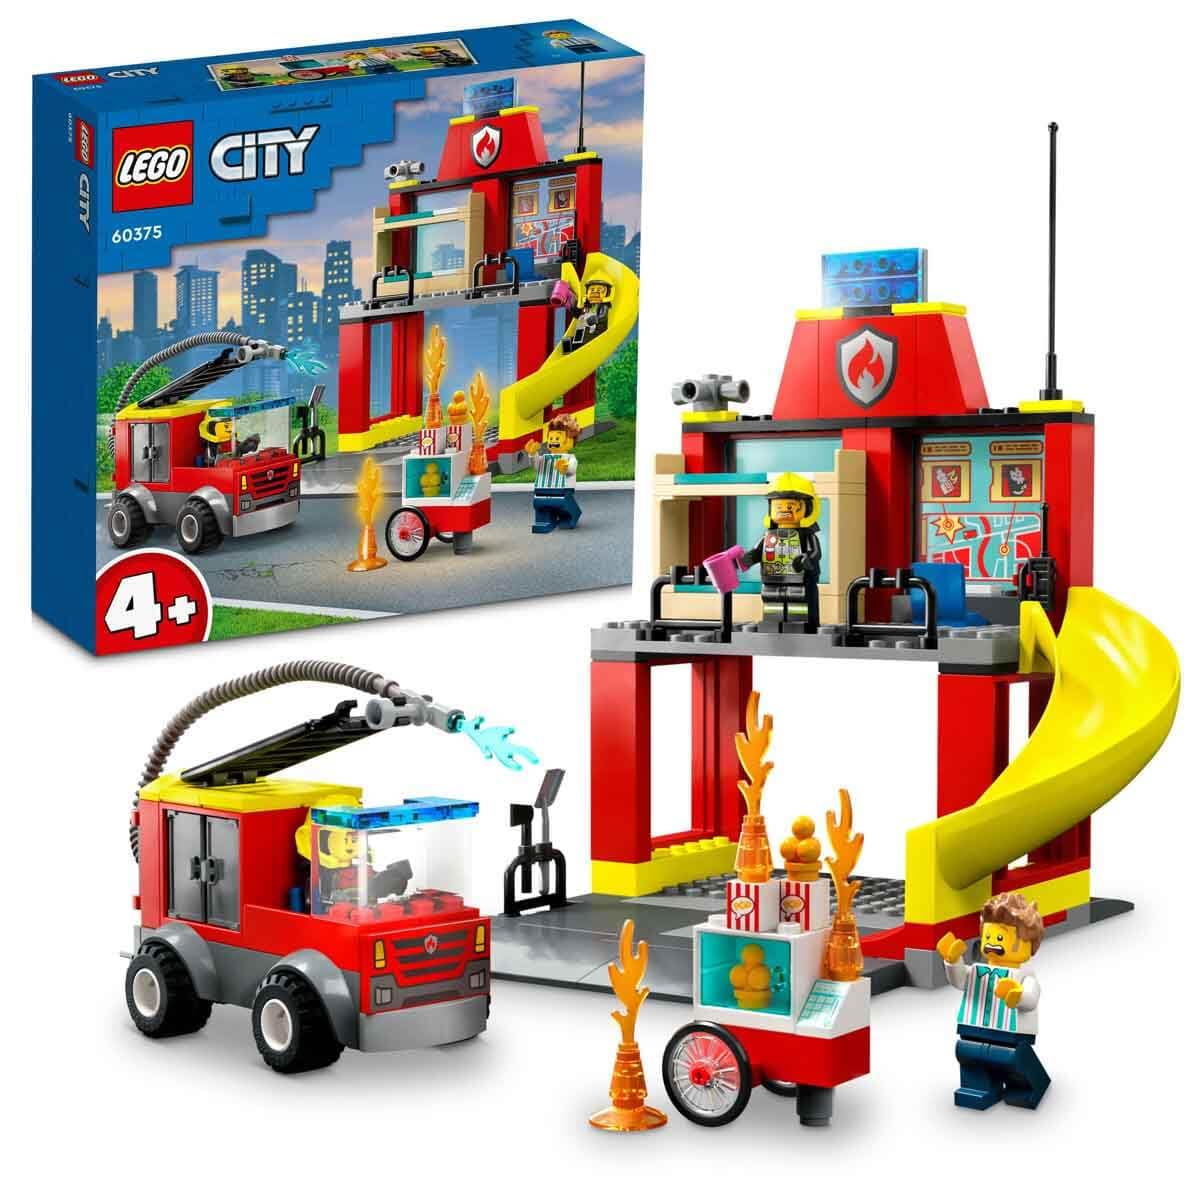 LEGO City Fire Station & Fire Engine Building Toy Set | 4 Yrs+